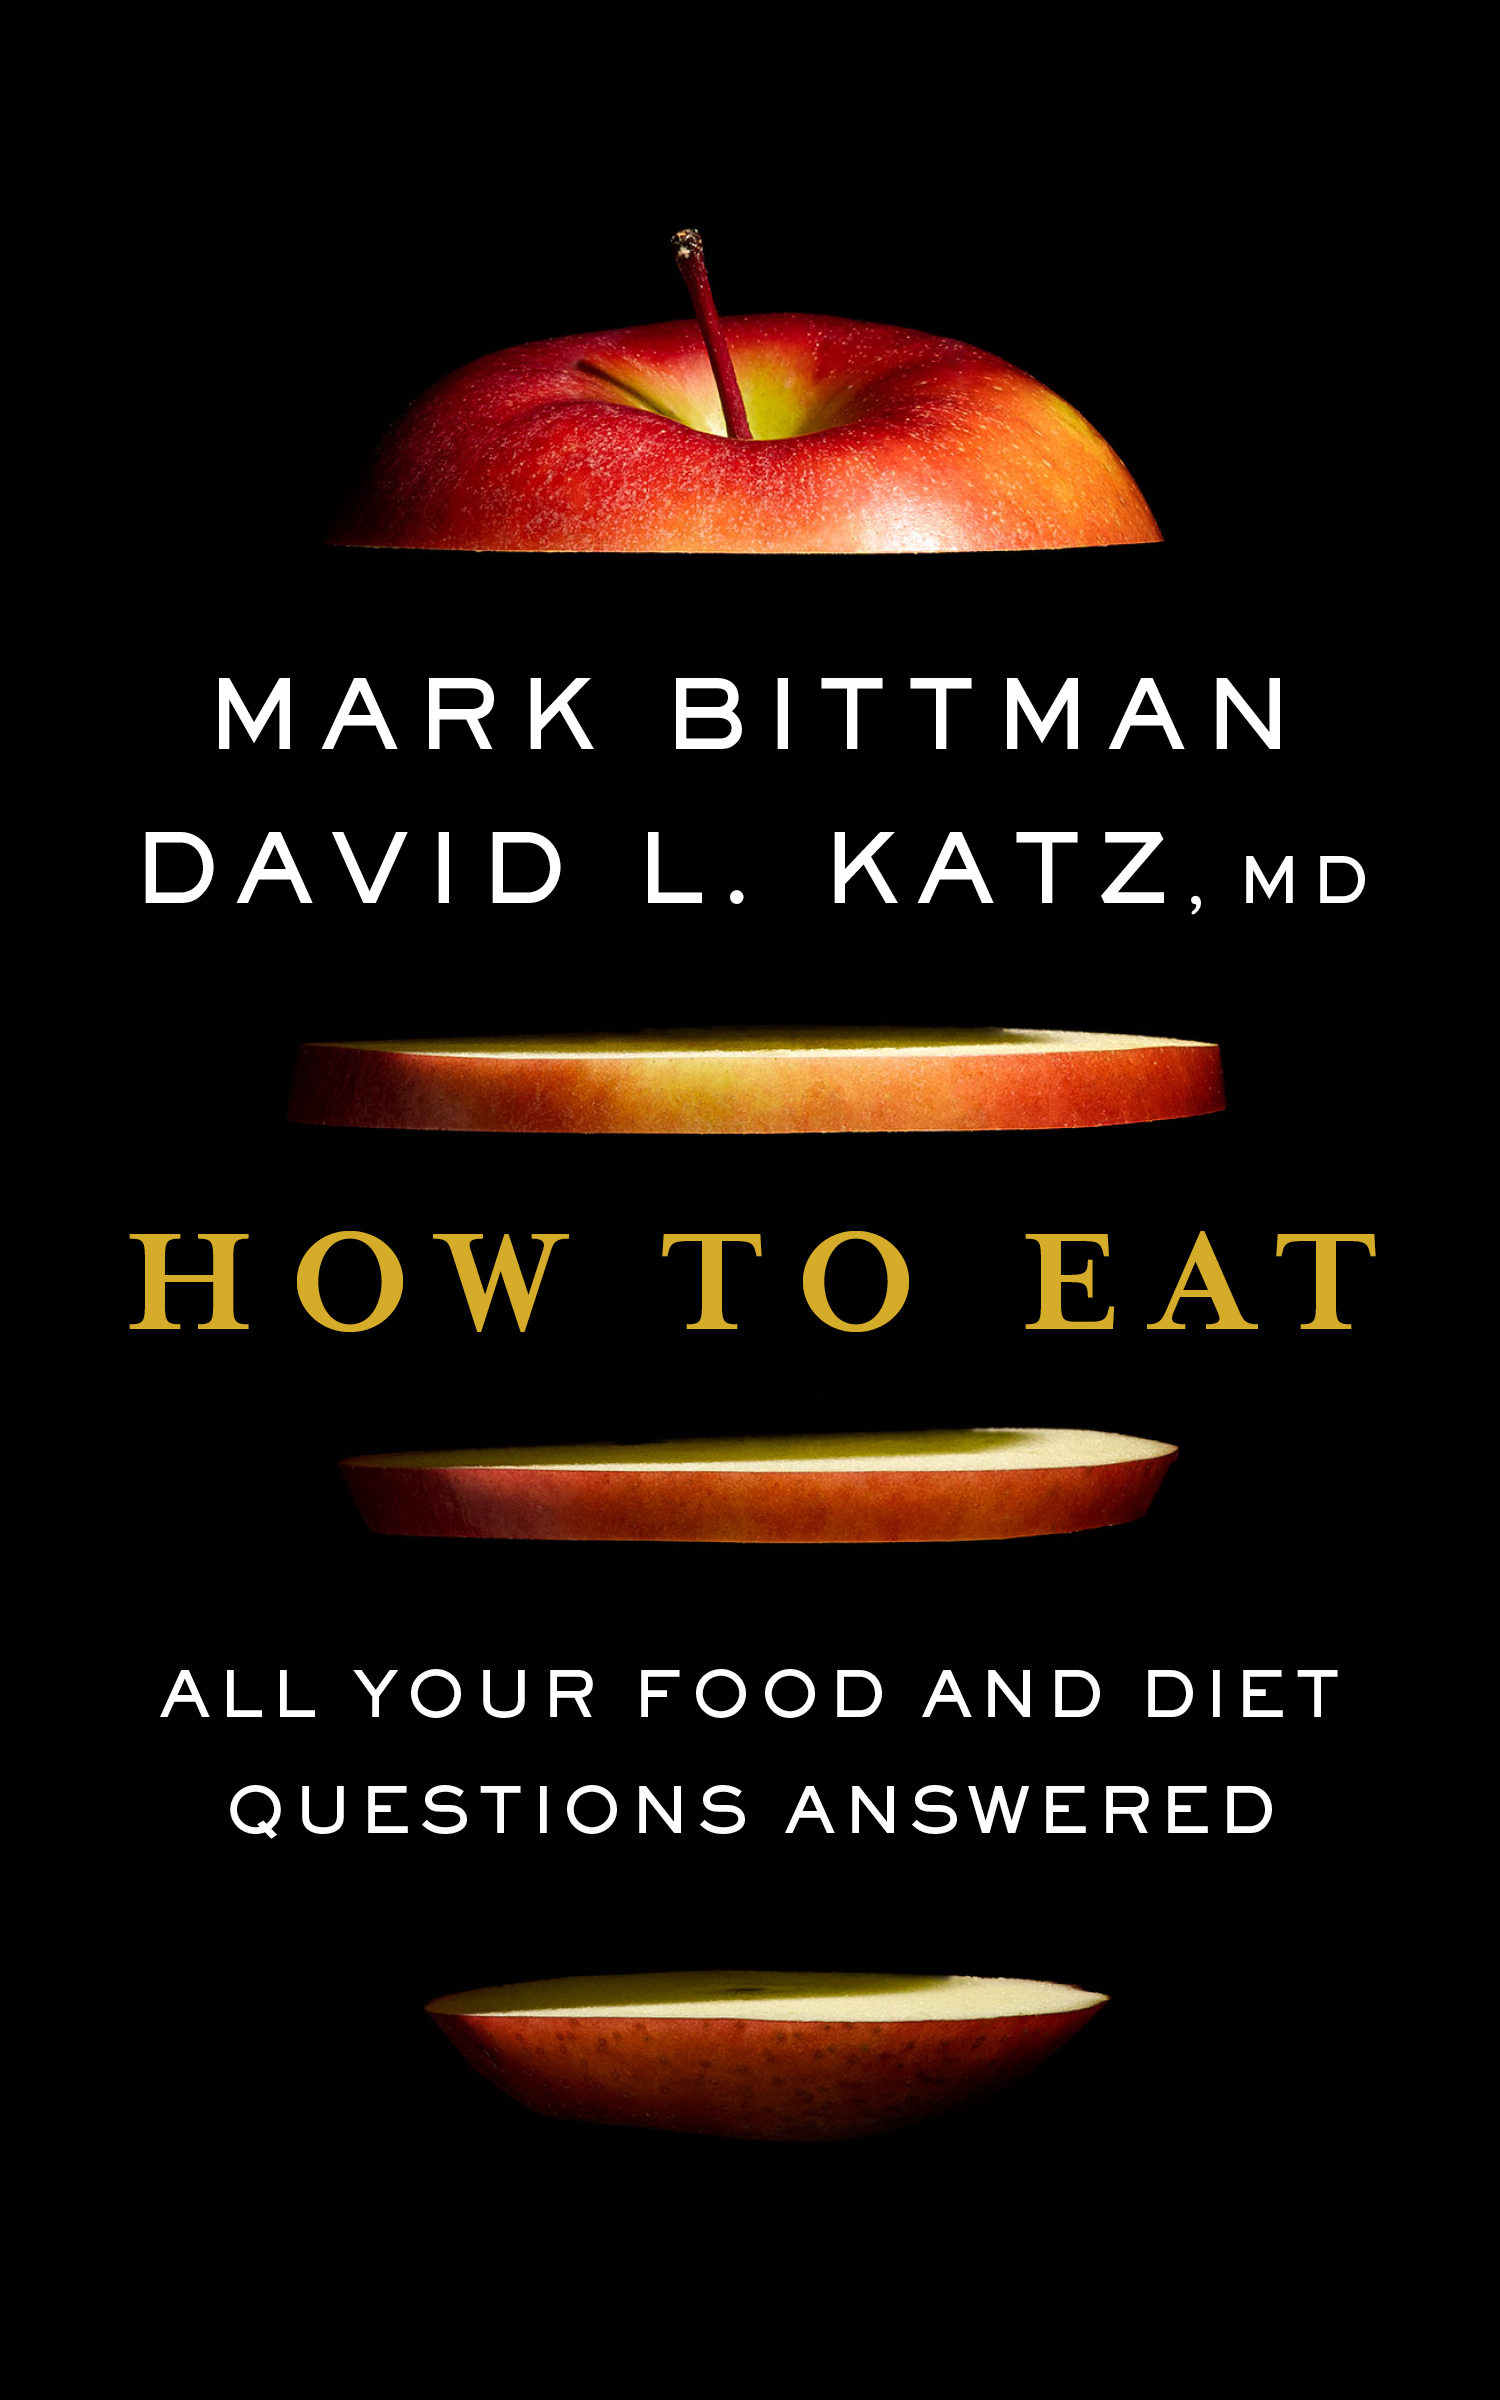 How to Eat book cover